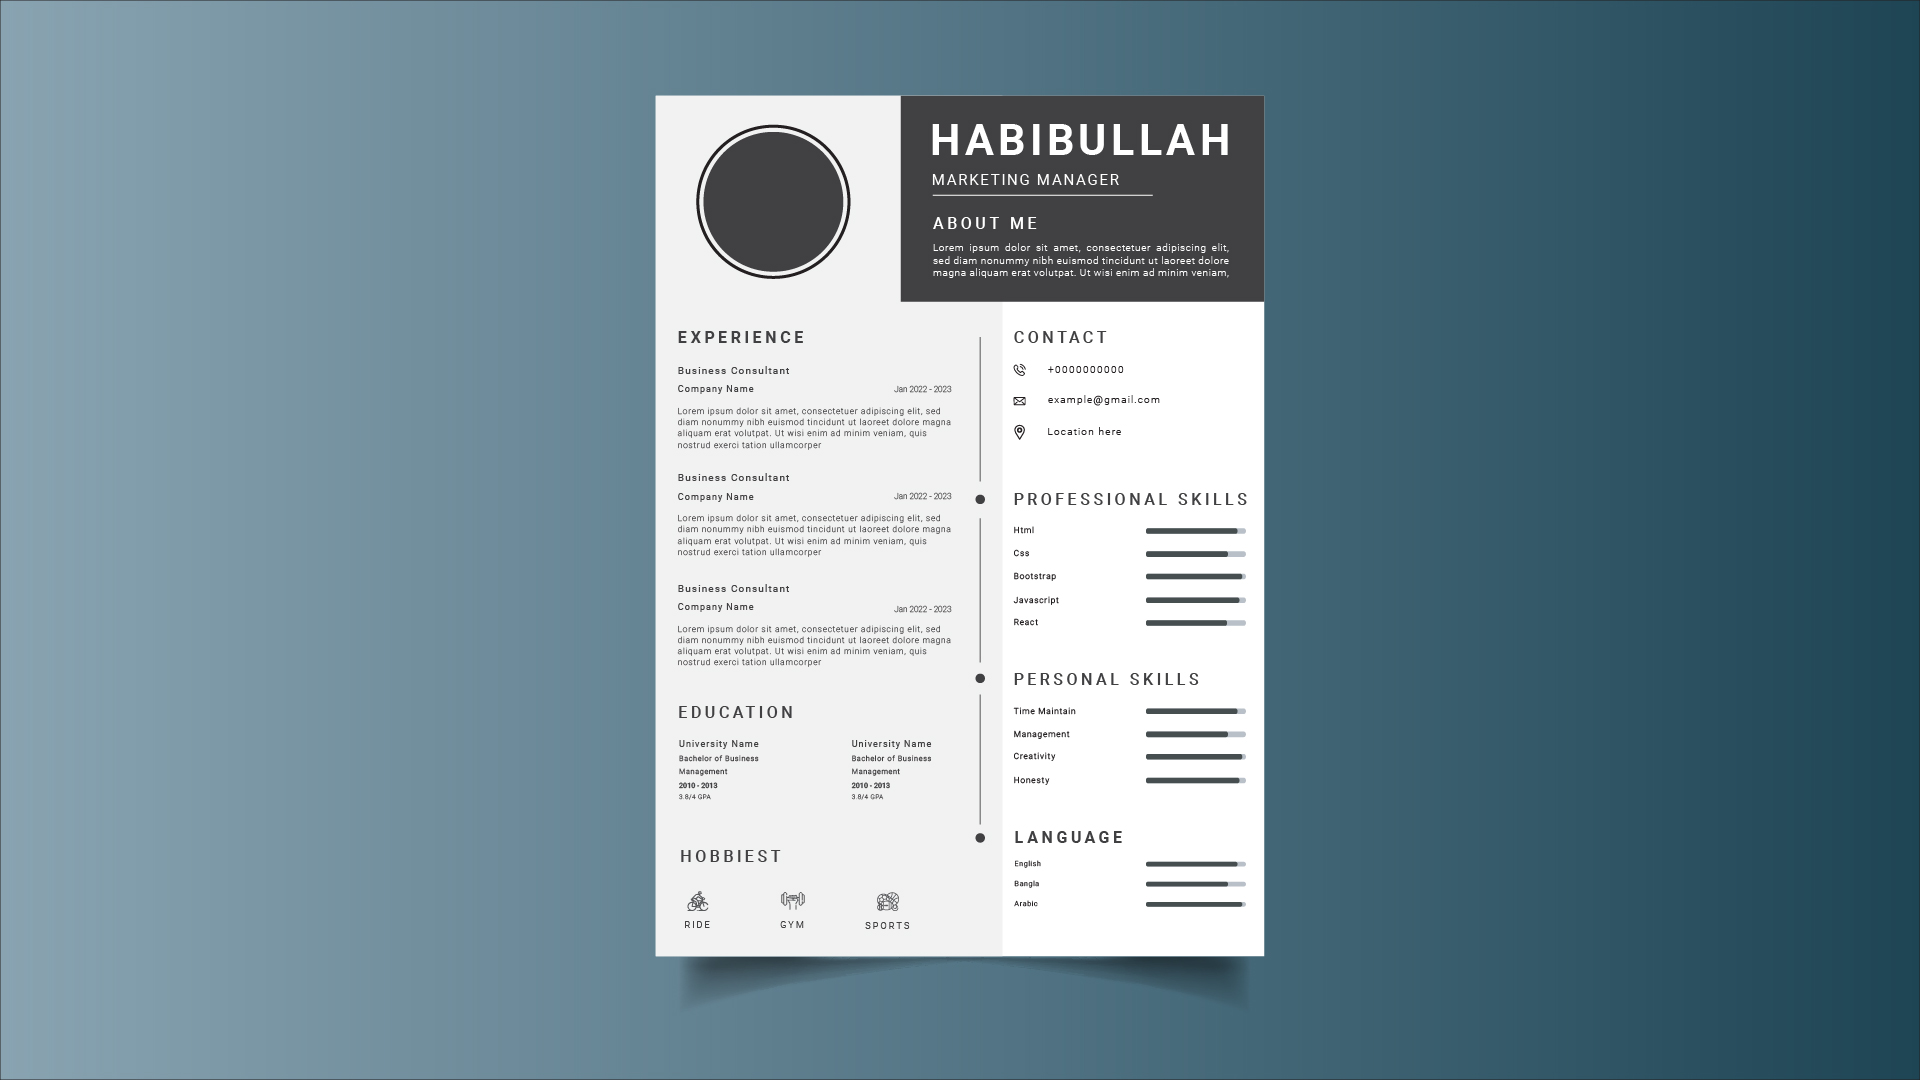 Simple resume template with a black and white color scheme.